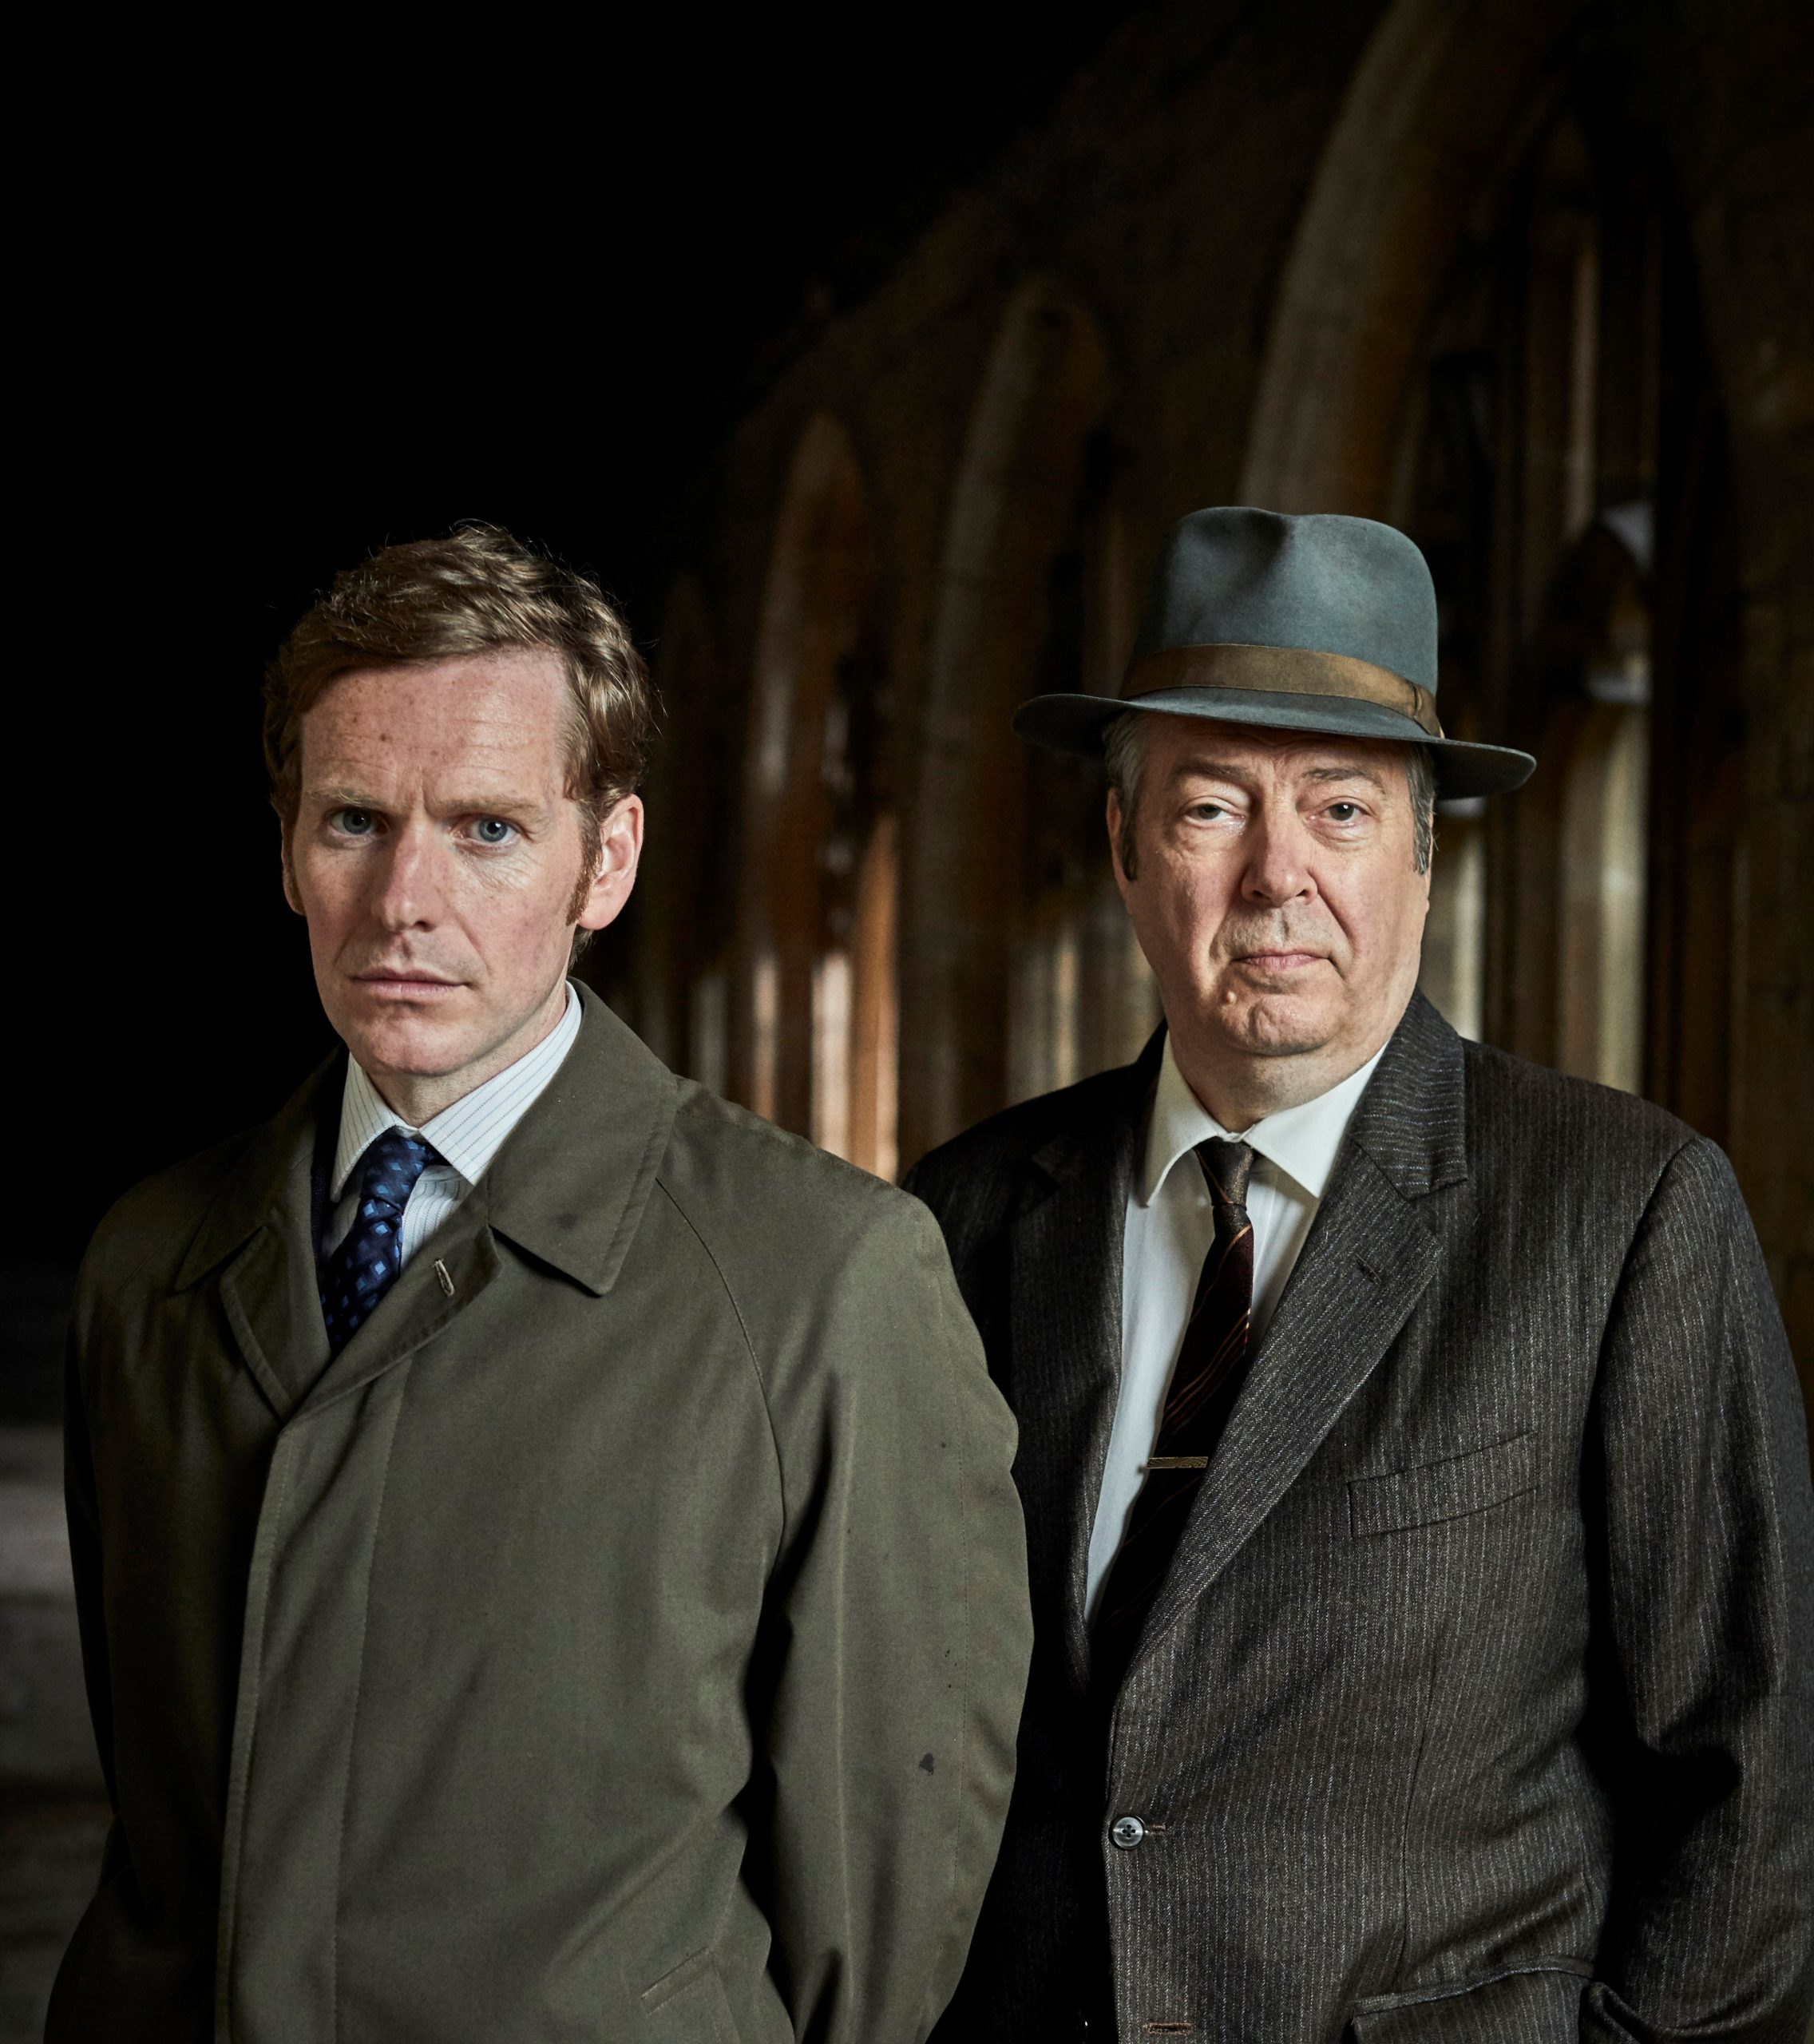 MASTERPIECE Mystery!
“Endeavour” Season 7

Shown from left to right: Shaun Evans as Endeavour Morse and Roger Allam as Fred Thursday

(C) Mammoth Screen

For editorial use only.